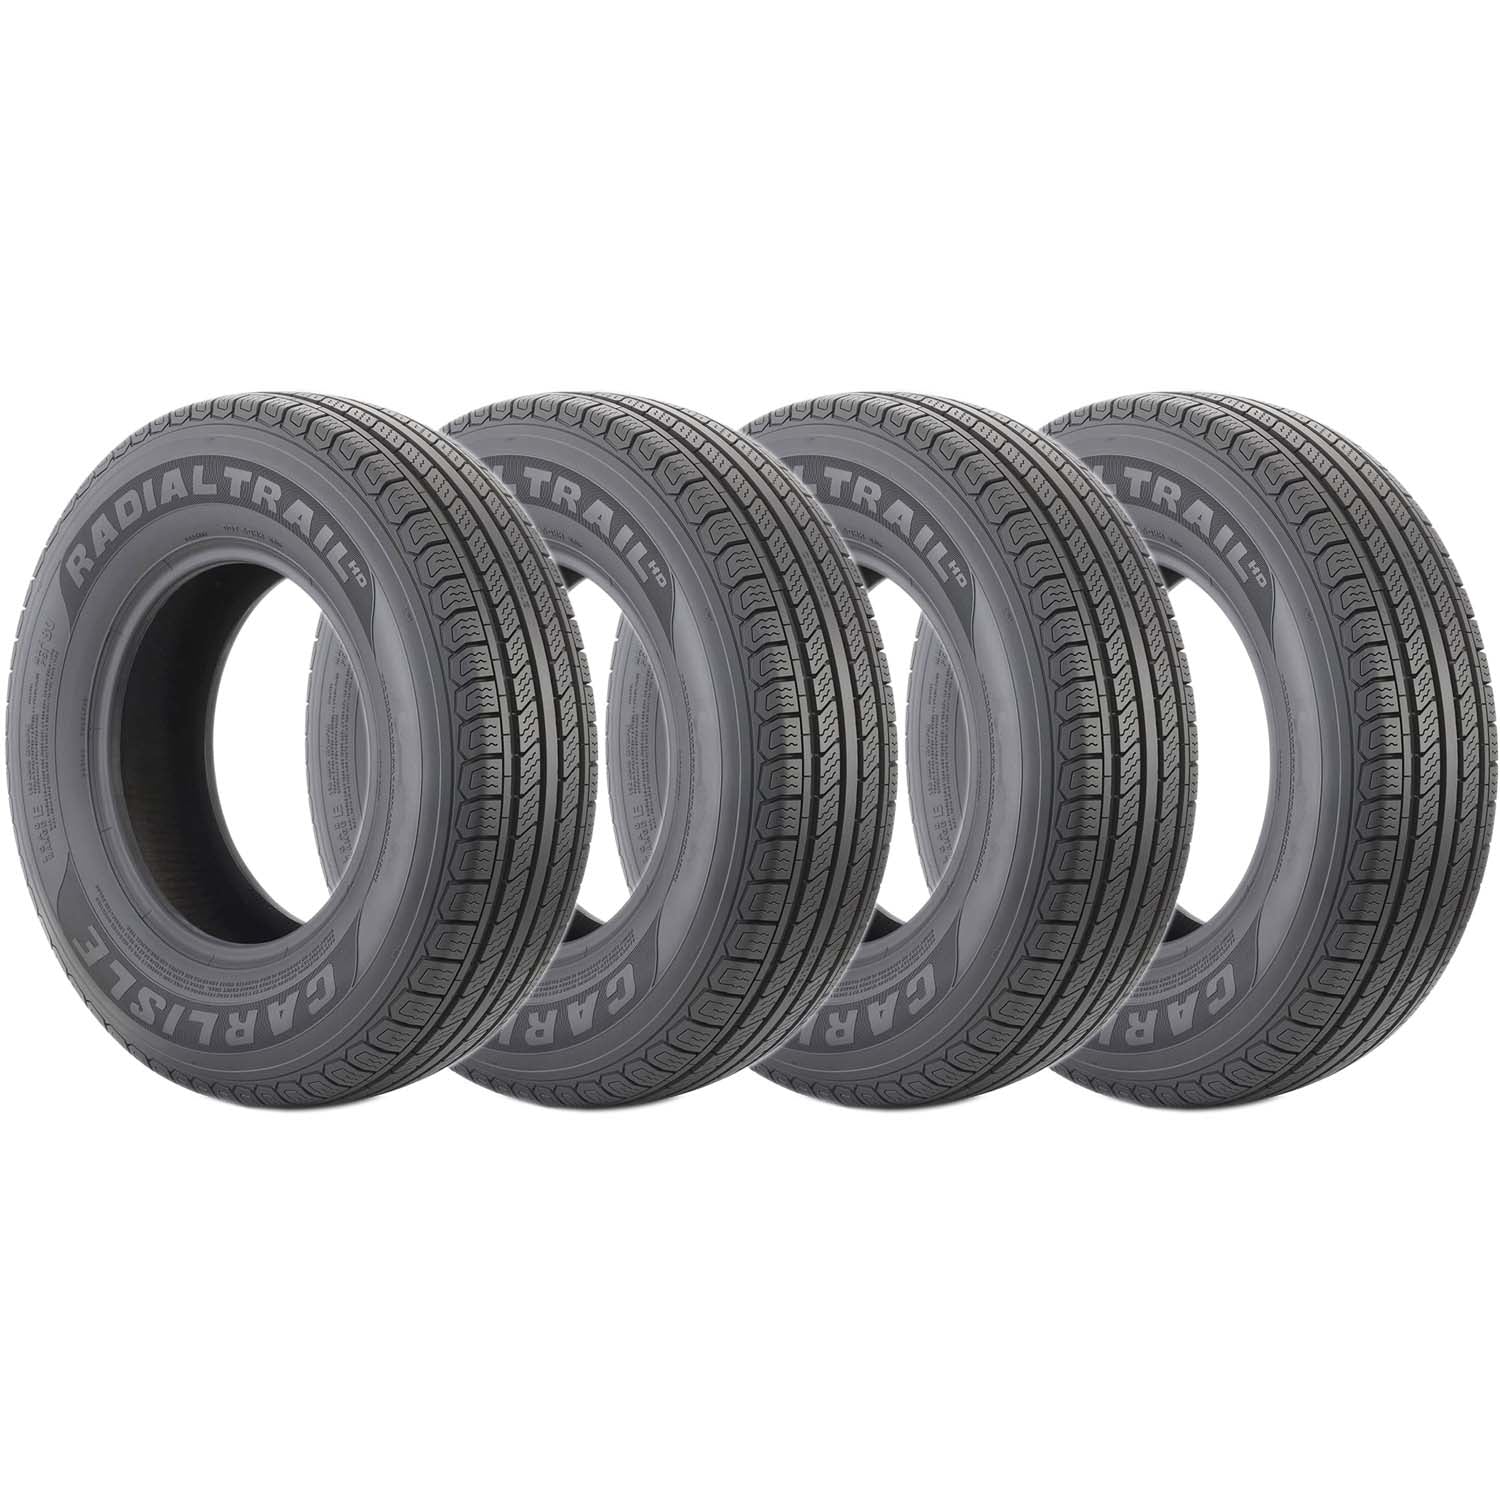 Carlisle Radial Trail HD Trailer Tire LRE 10ply ST235/80R16 Pack of 4